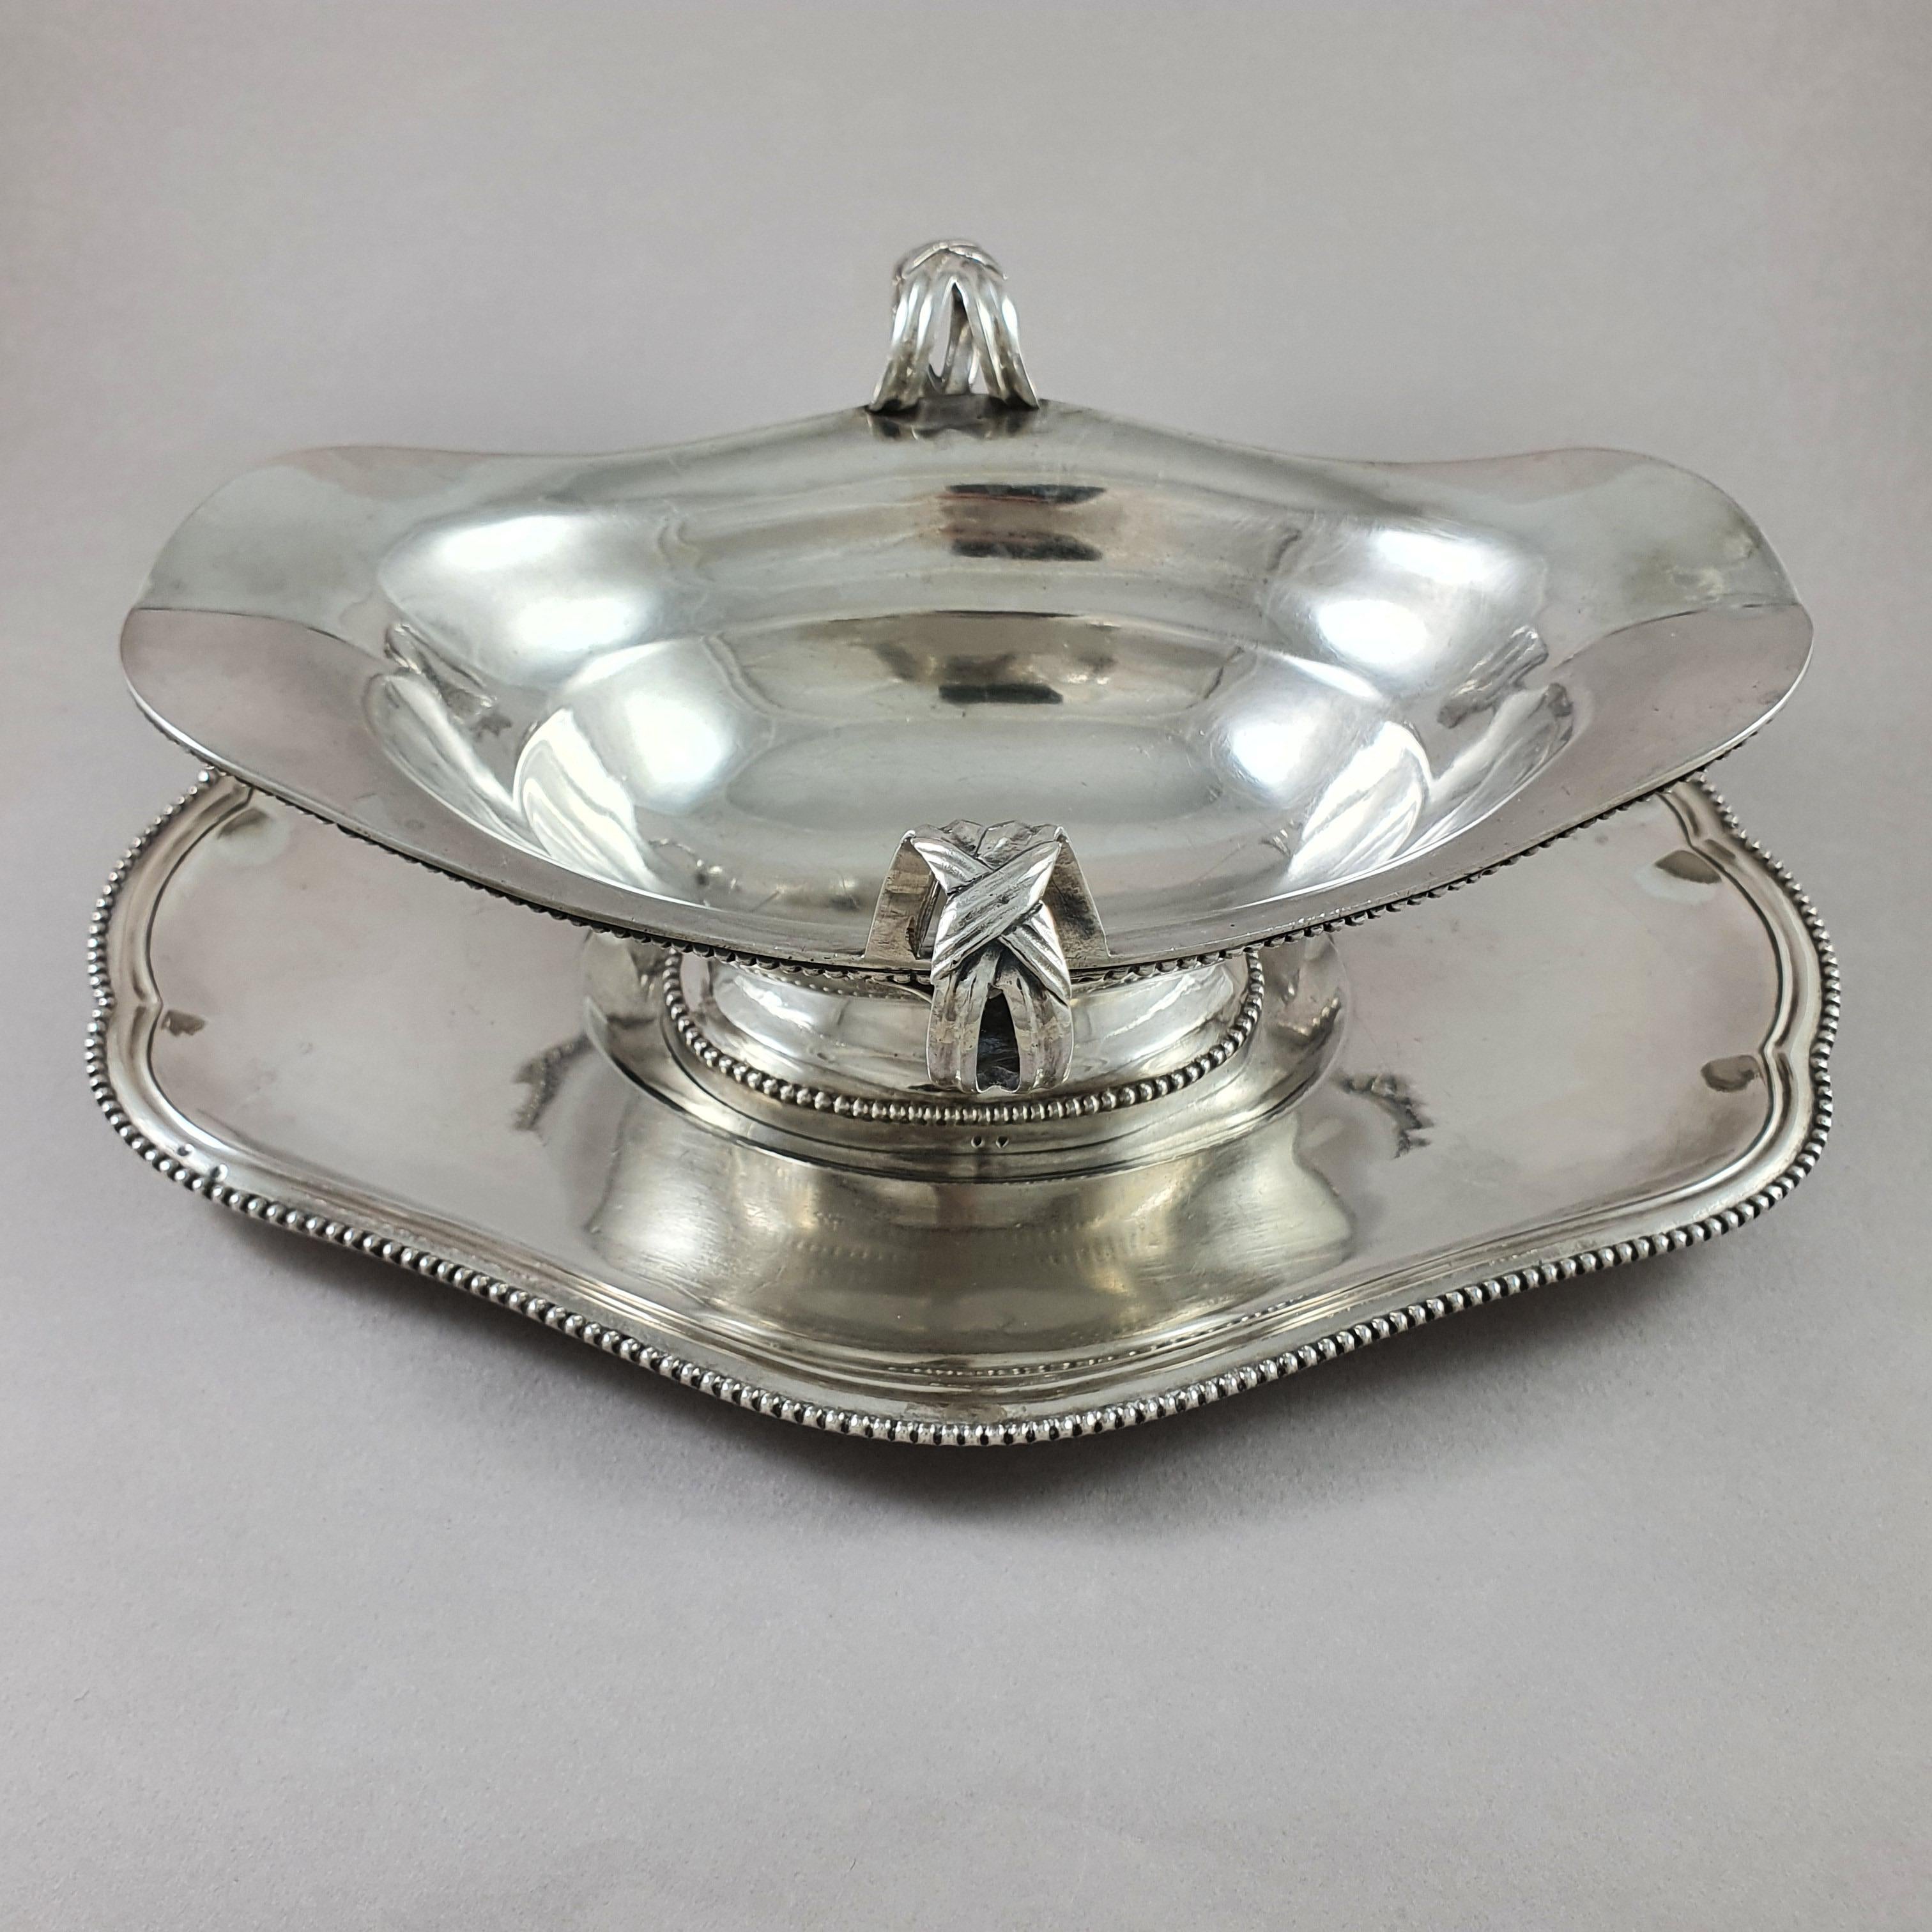 Rare sauceboat and its frame in sterling silver from the 18th century 

Oval in shape with two pouring spouts, decorated with ribboned knots and finished with foliage, the borders with rows of pearls 

Hallmarked A crowned for Paris between 1783